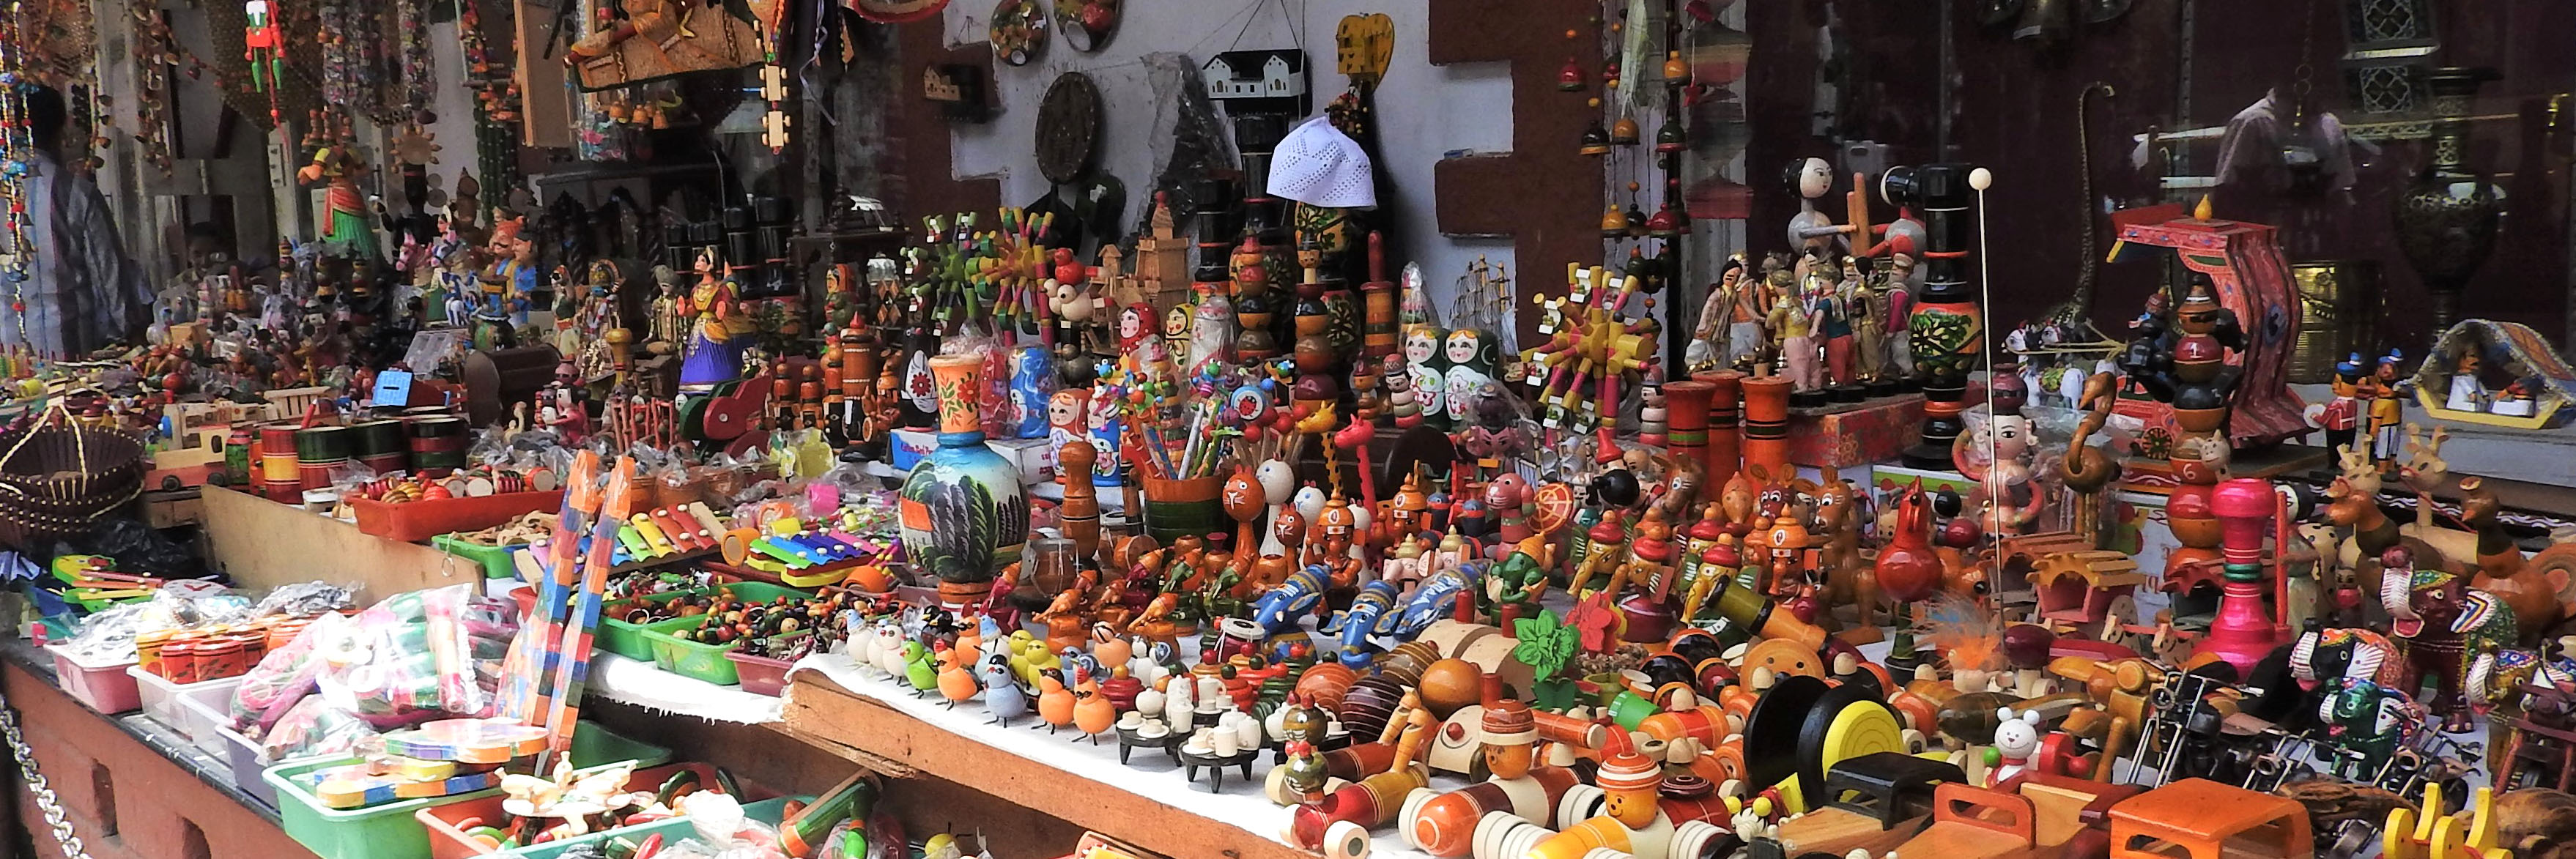 Shop for crafts sourced from all over Karnataka